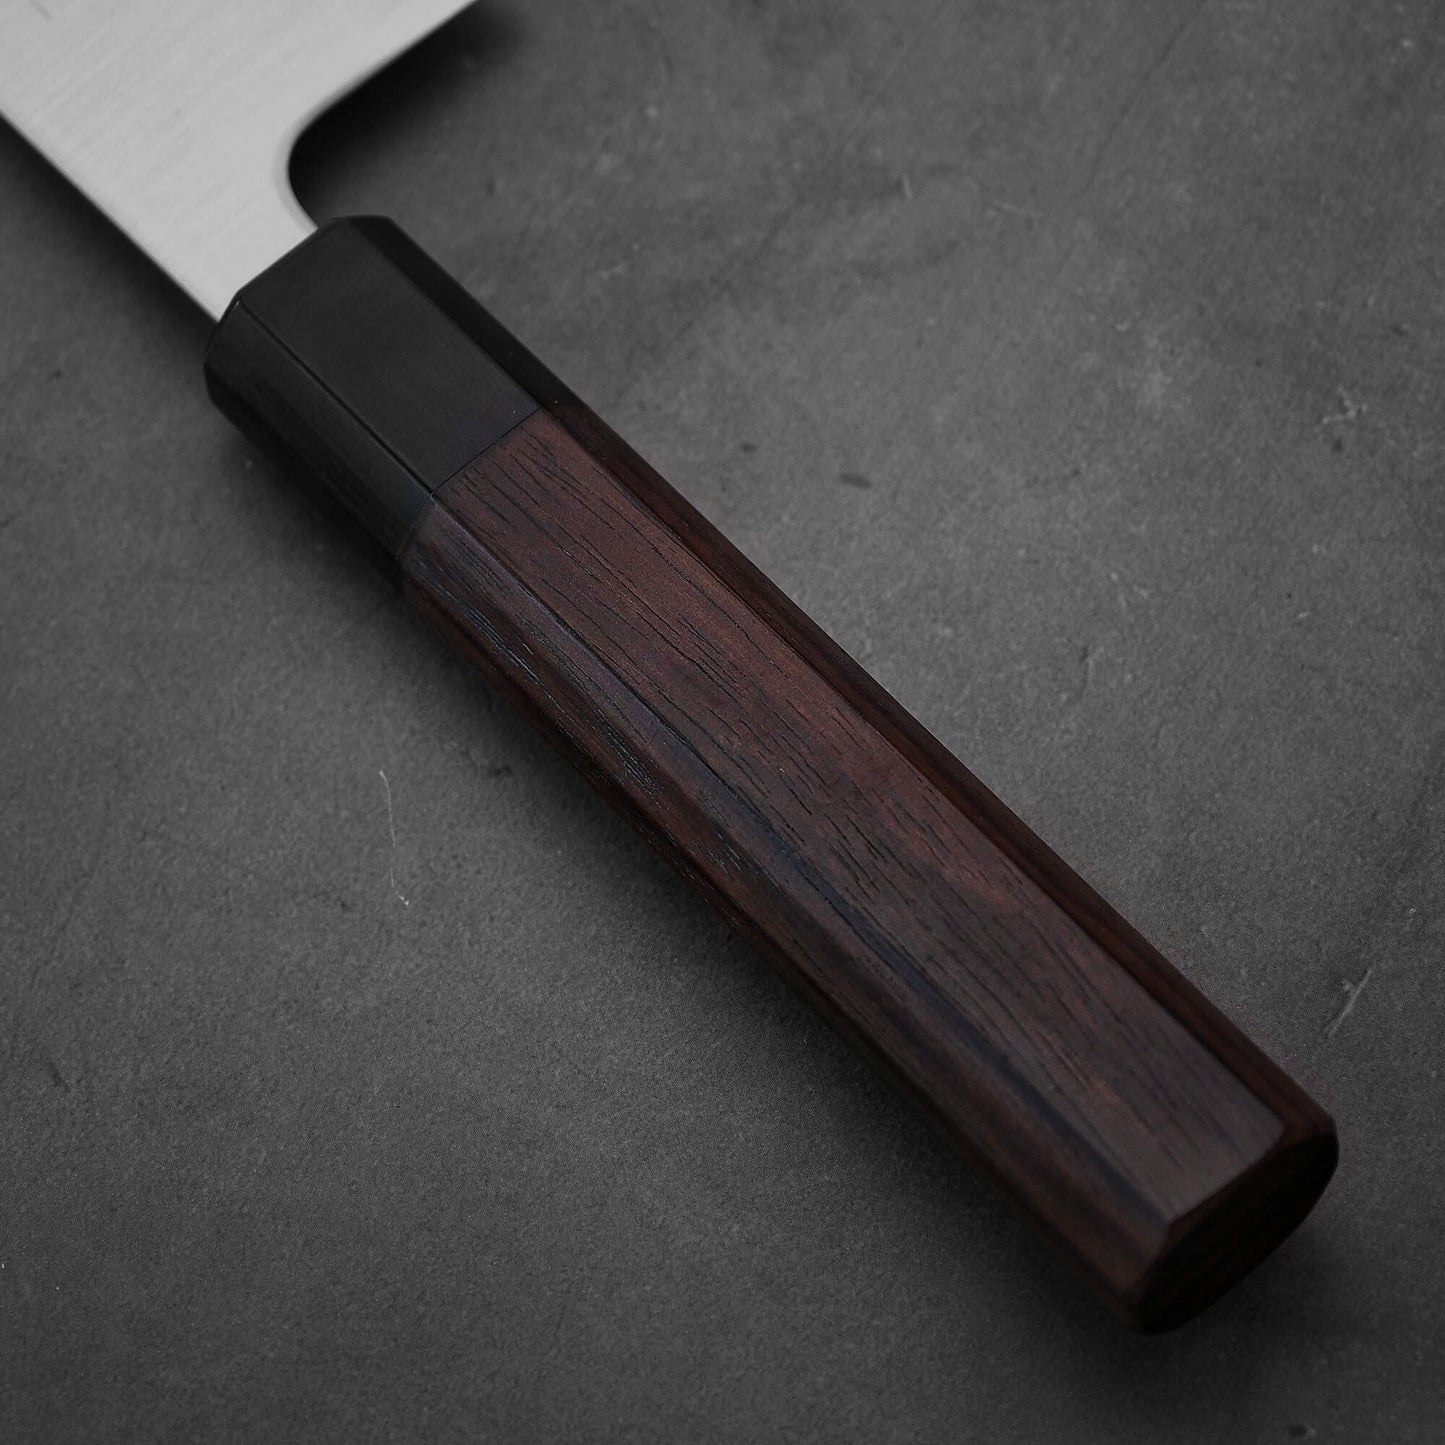 Close up view of the handle of Yoshihiro migaki aogami super gyuto. This Japanese chef's knife has an octagonal rosewood handle.